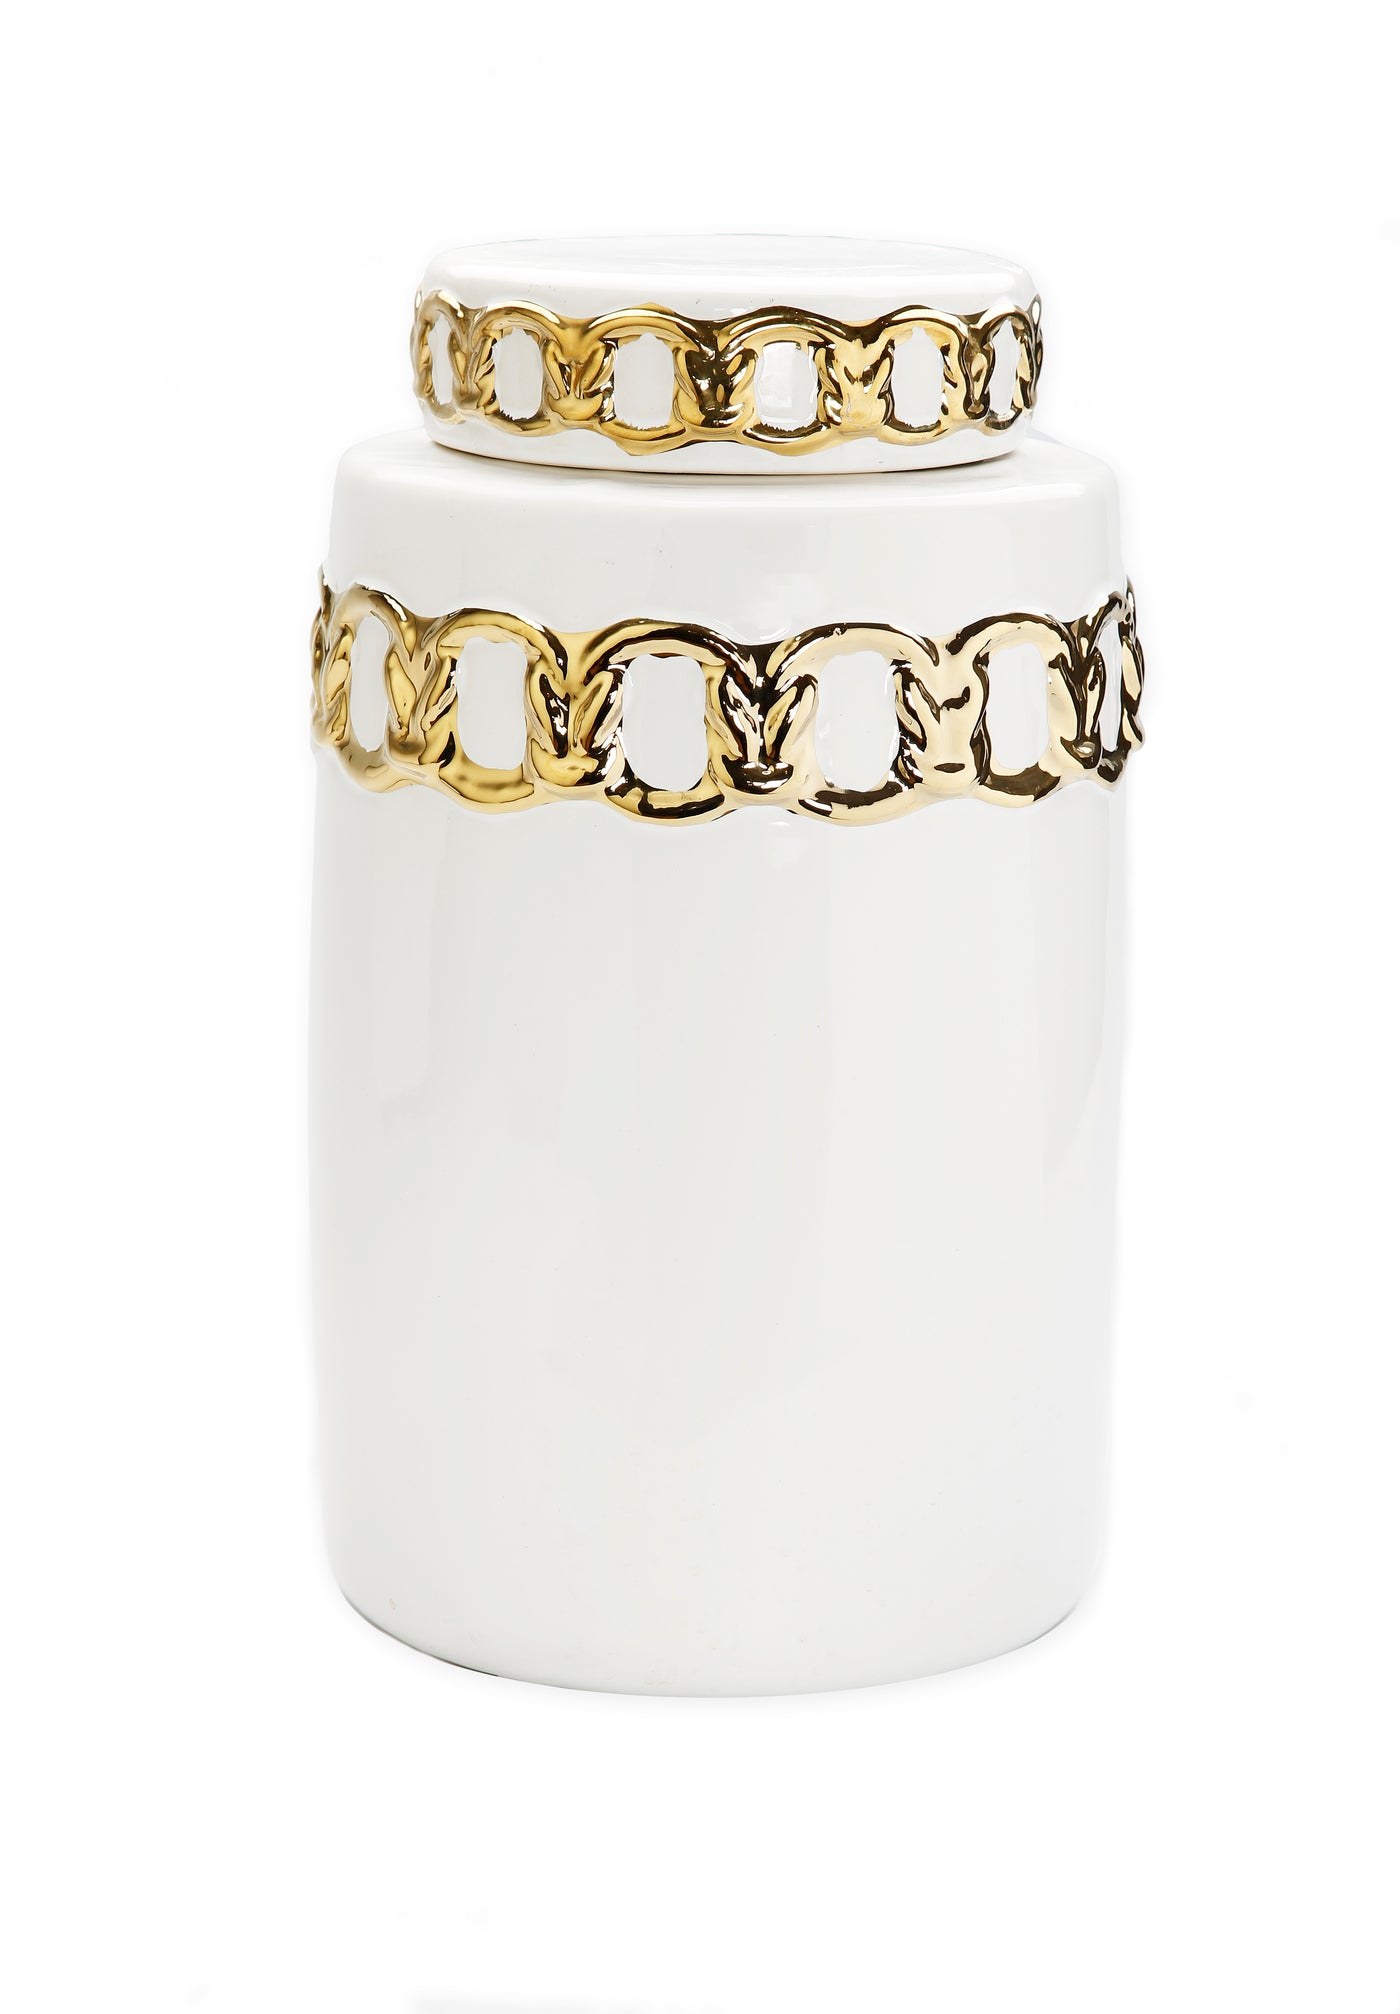 12.5"H White Jar with Cover Gold Design on Top